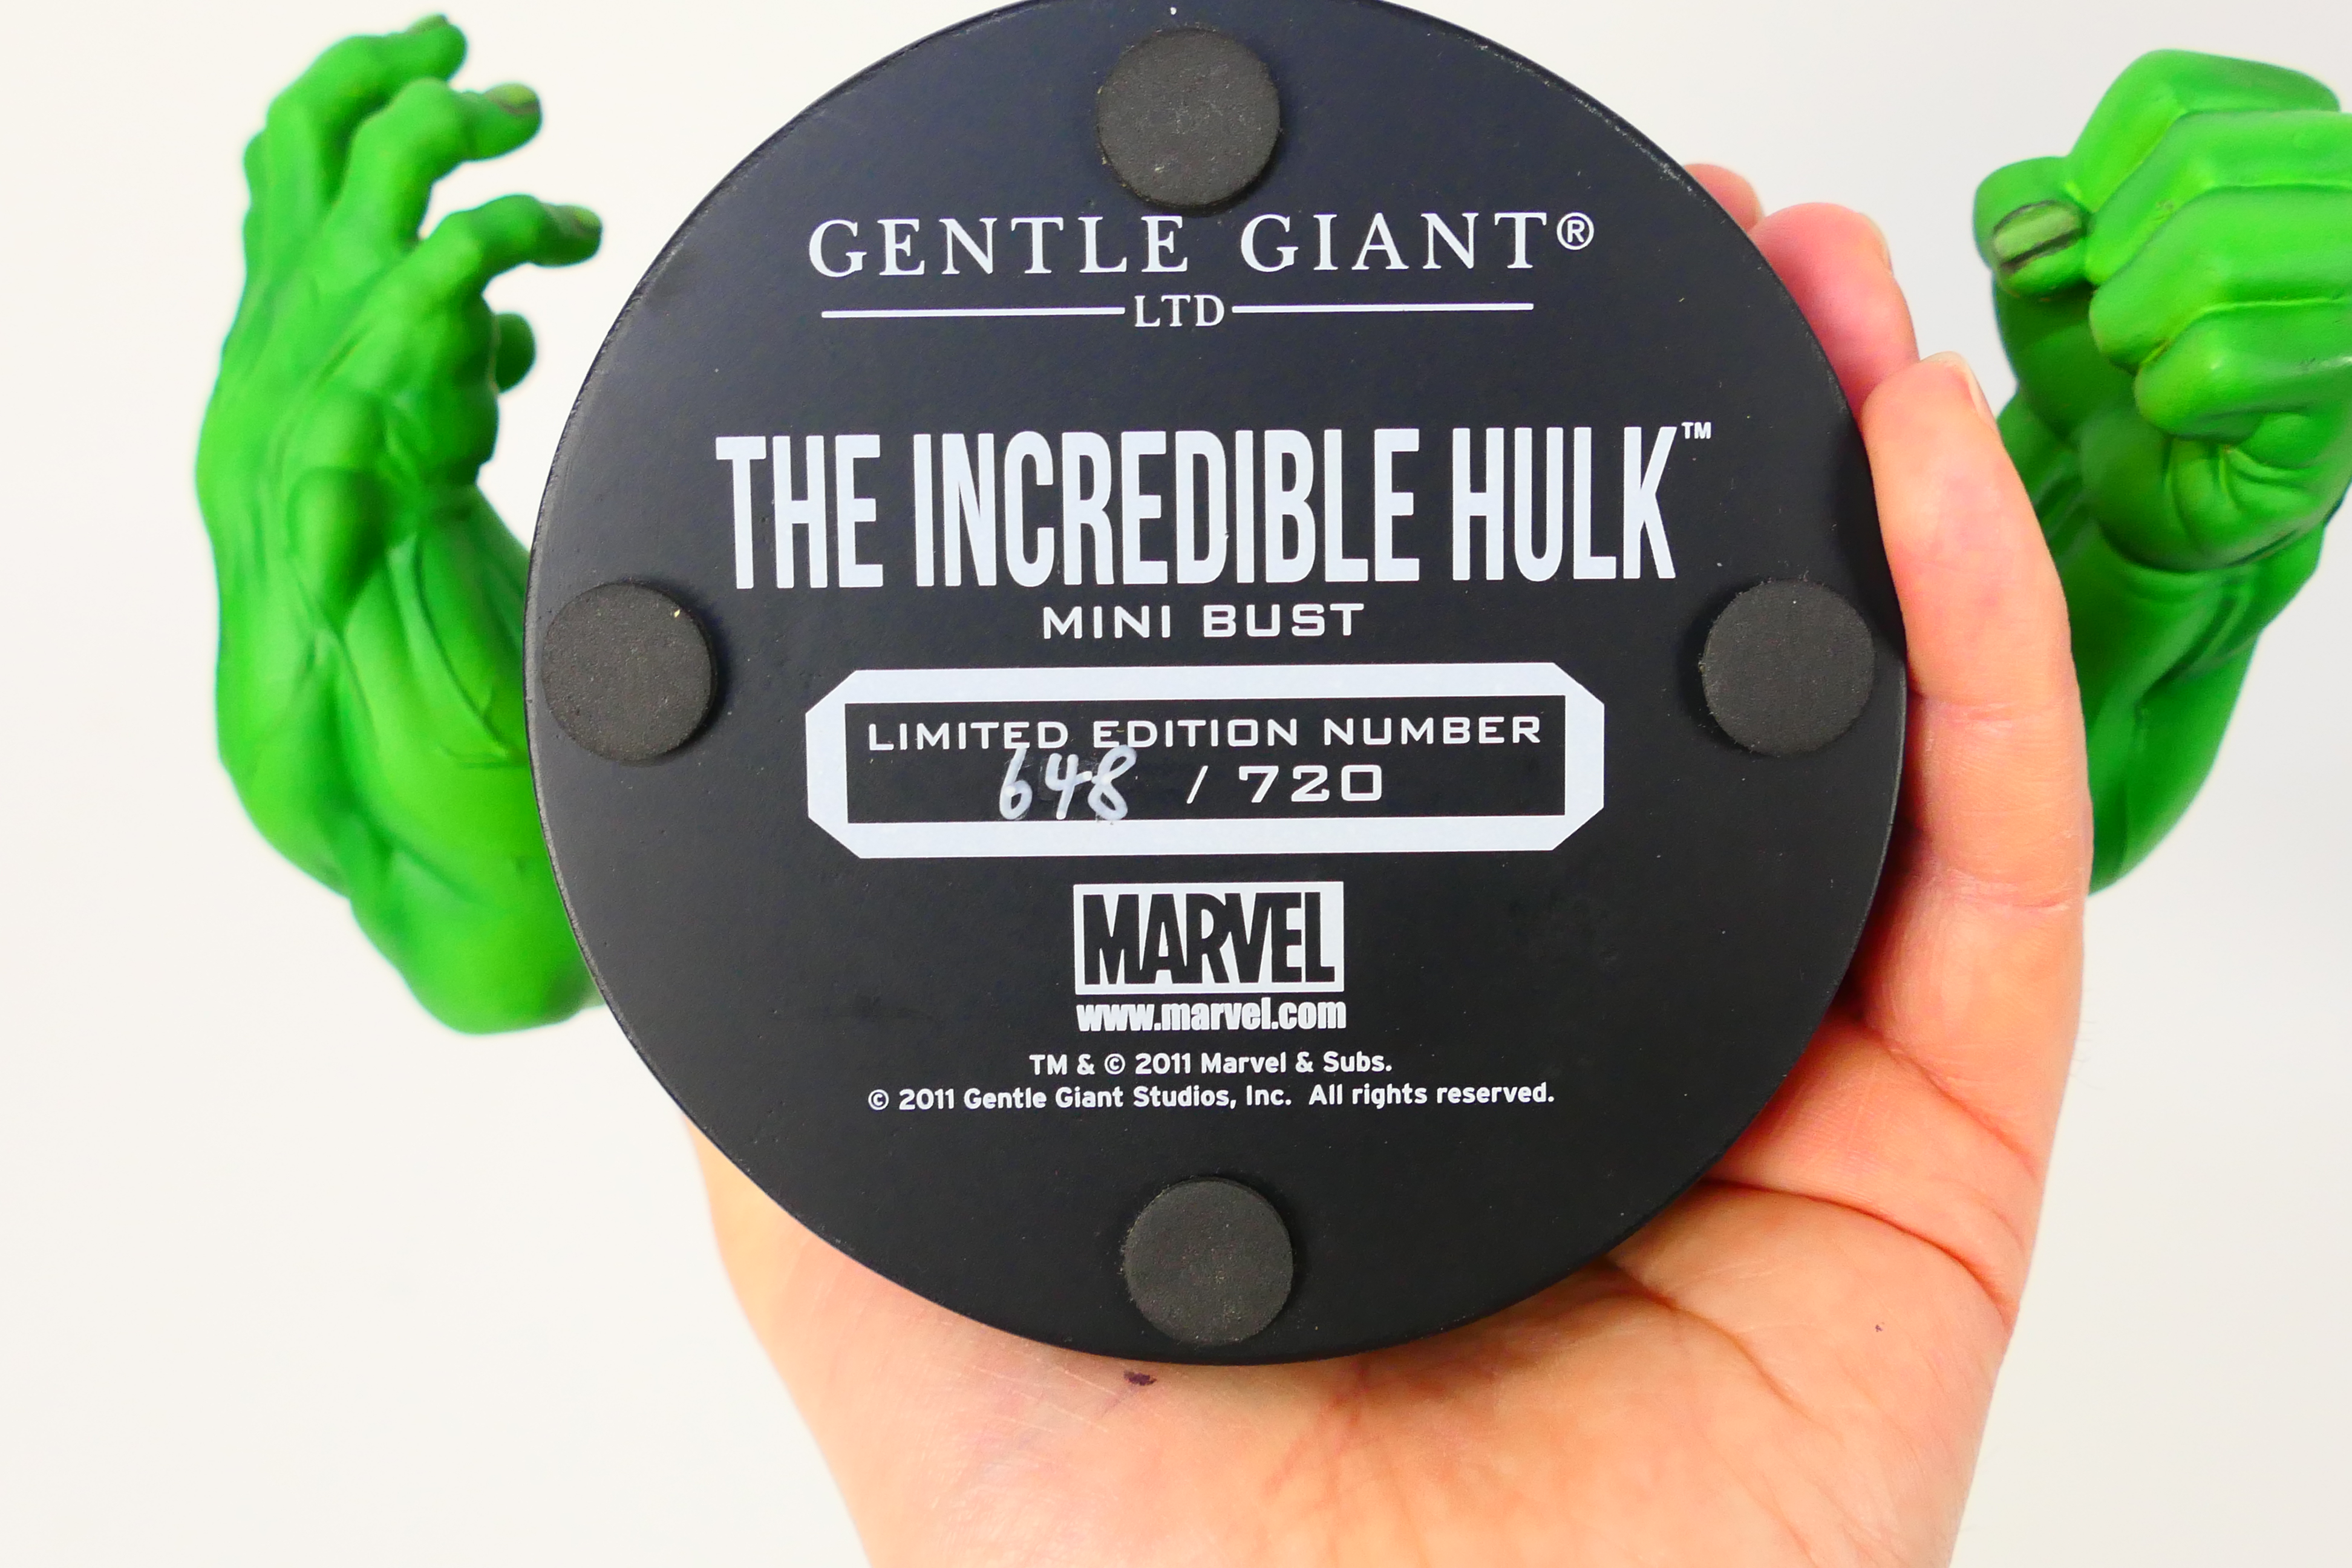 Gentle Giant Ltd - Marvel - A limited edition The Incredible Hulk 7.5 inch mini bust. - Image 5 of 6